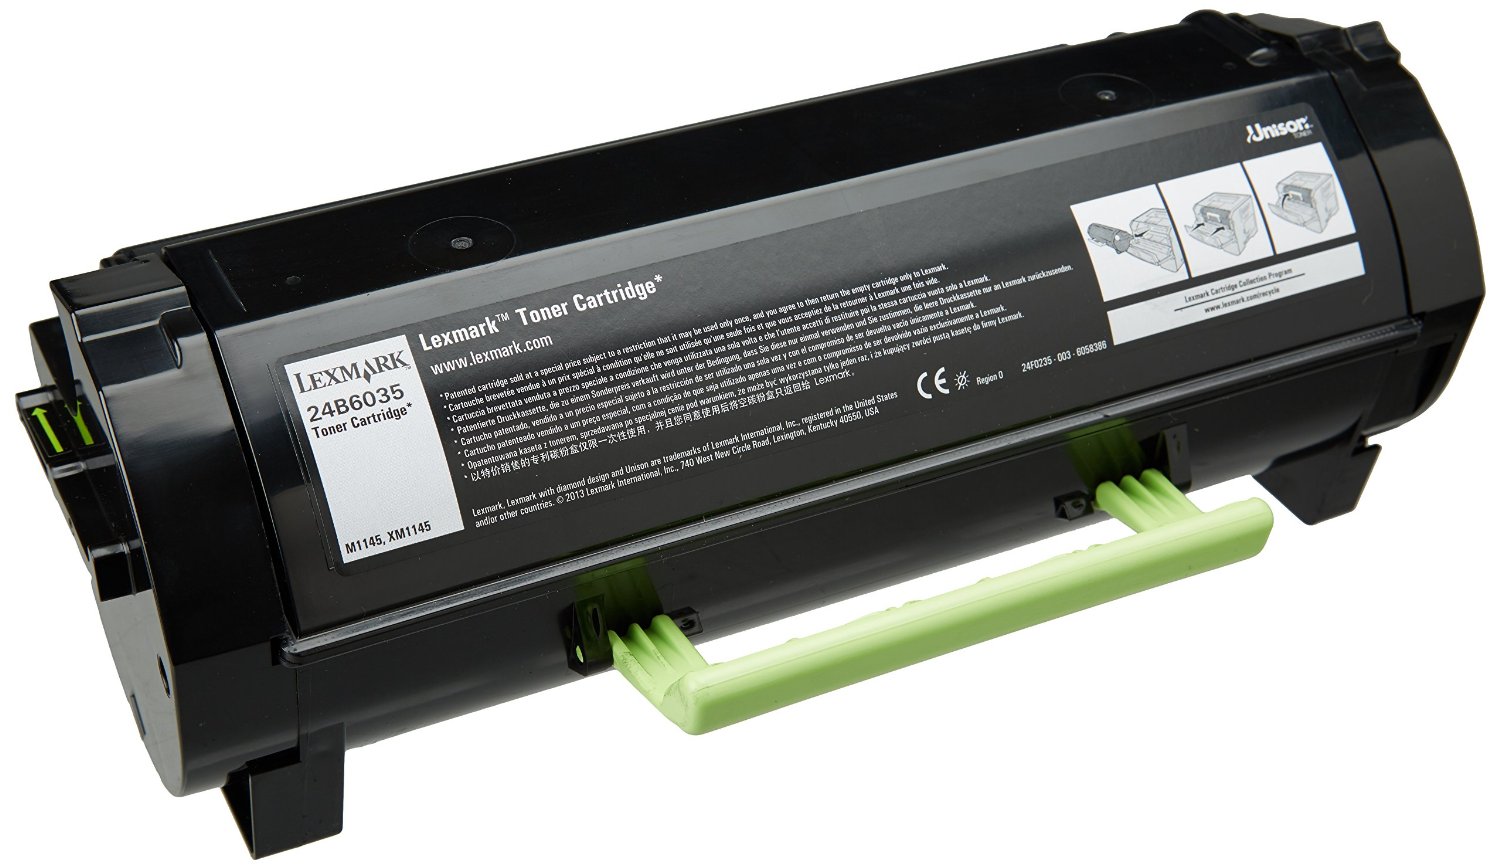 Lexmark 24B6035 G2491 16K Yield NEW COMPATIBLE Toner for M1145 XM1145 MFP